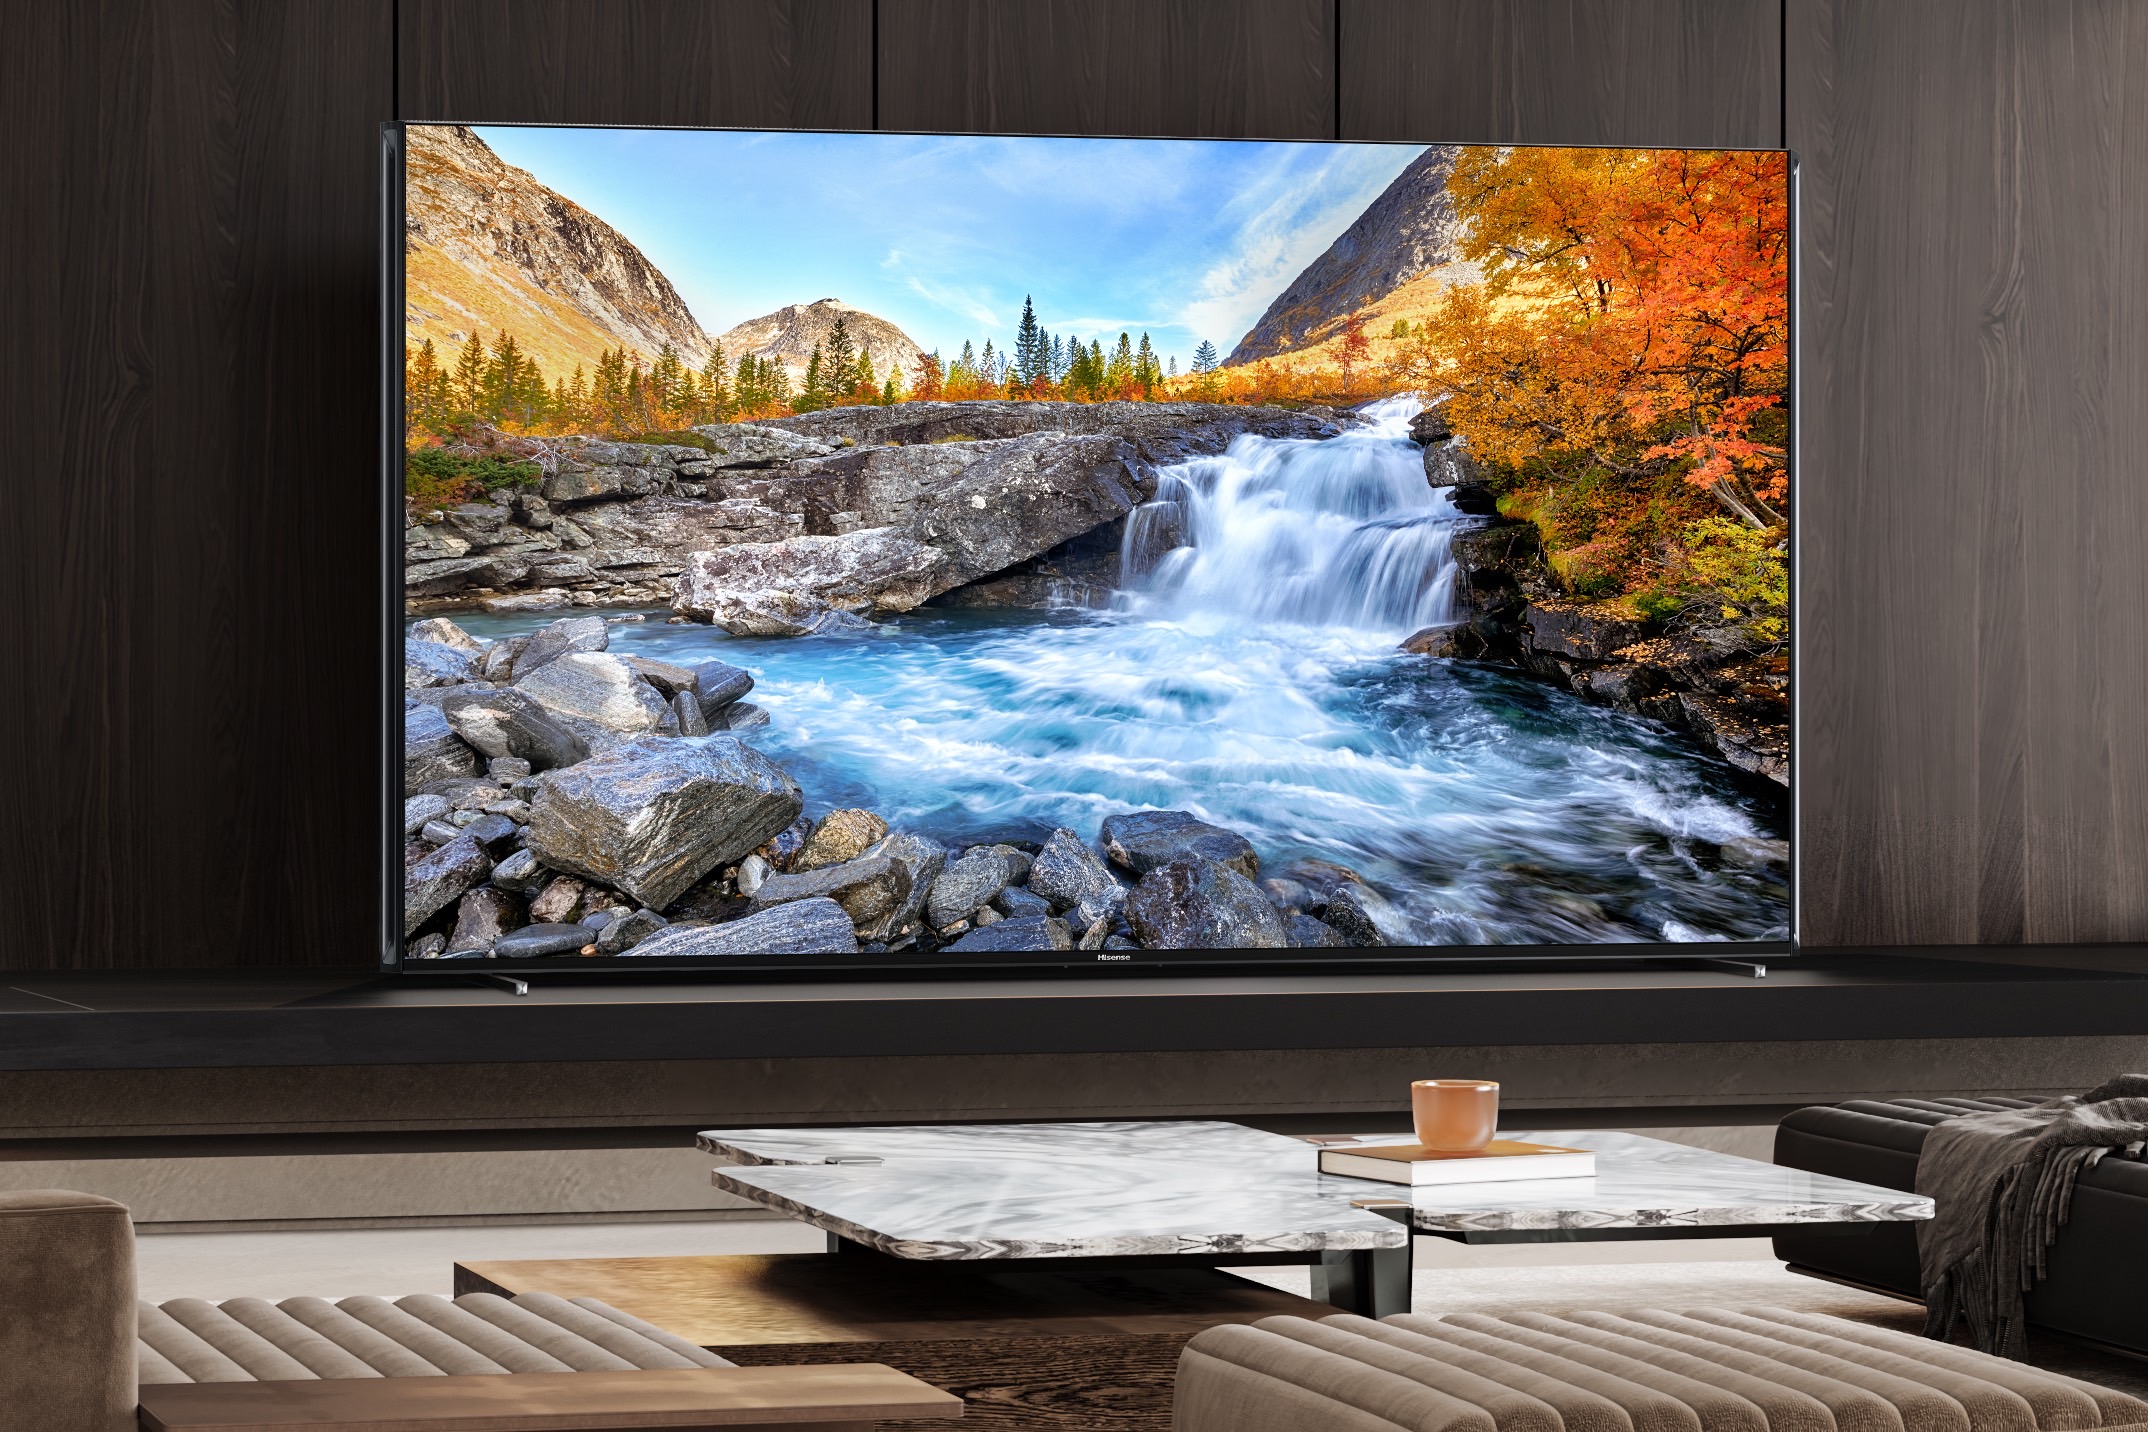 Hisense shows off massively bright 98- and 100-inch TVs at CES